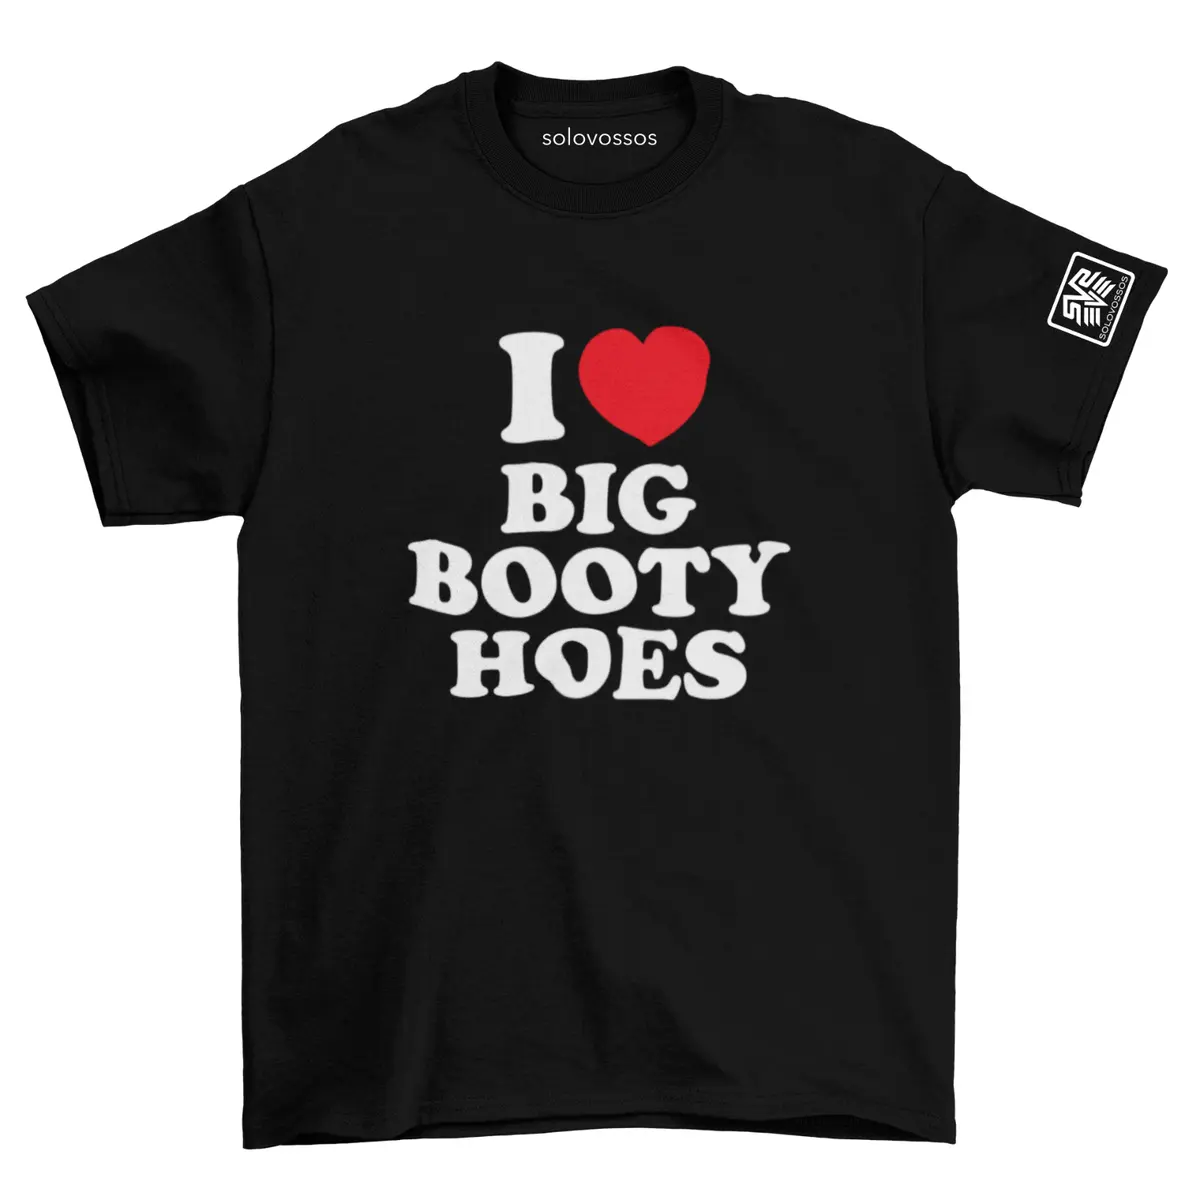 curt bird recommends big black booty hos pic